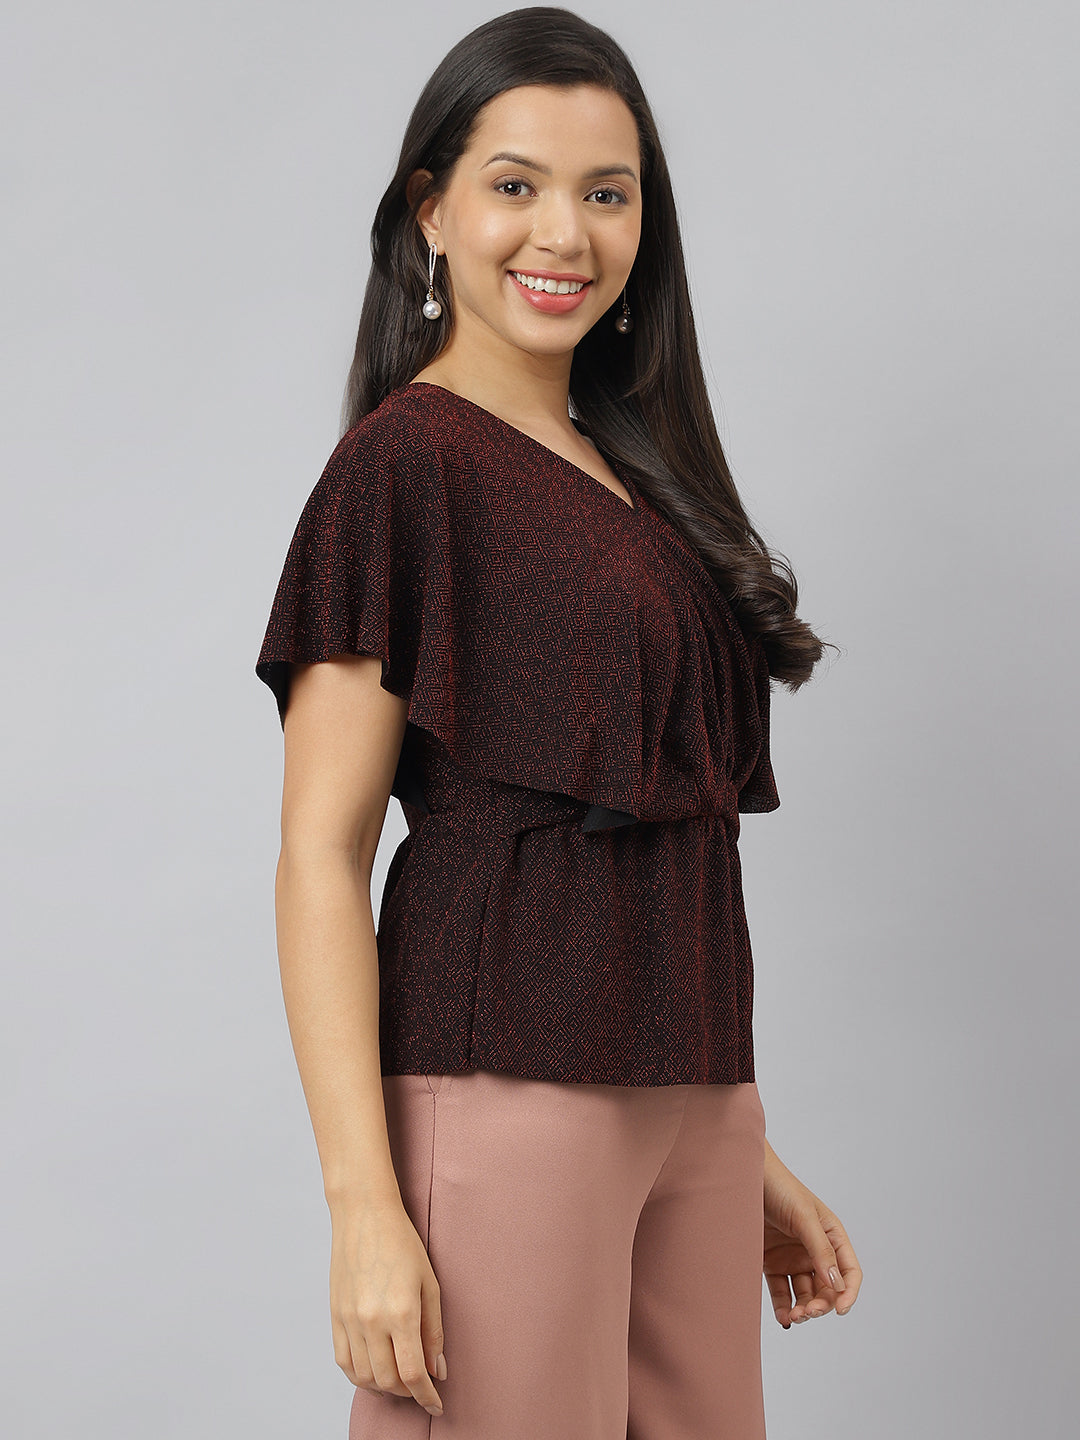 Red V Neck With Flare Sleeve Embellished Ruffle Top